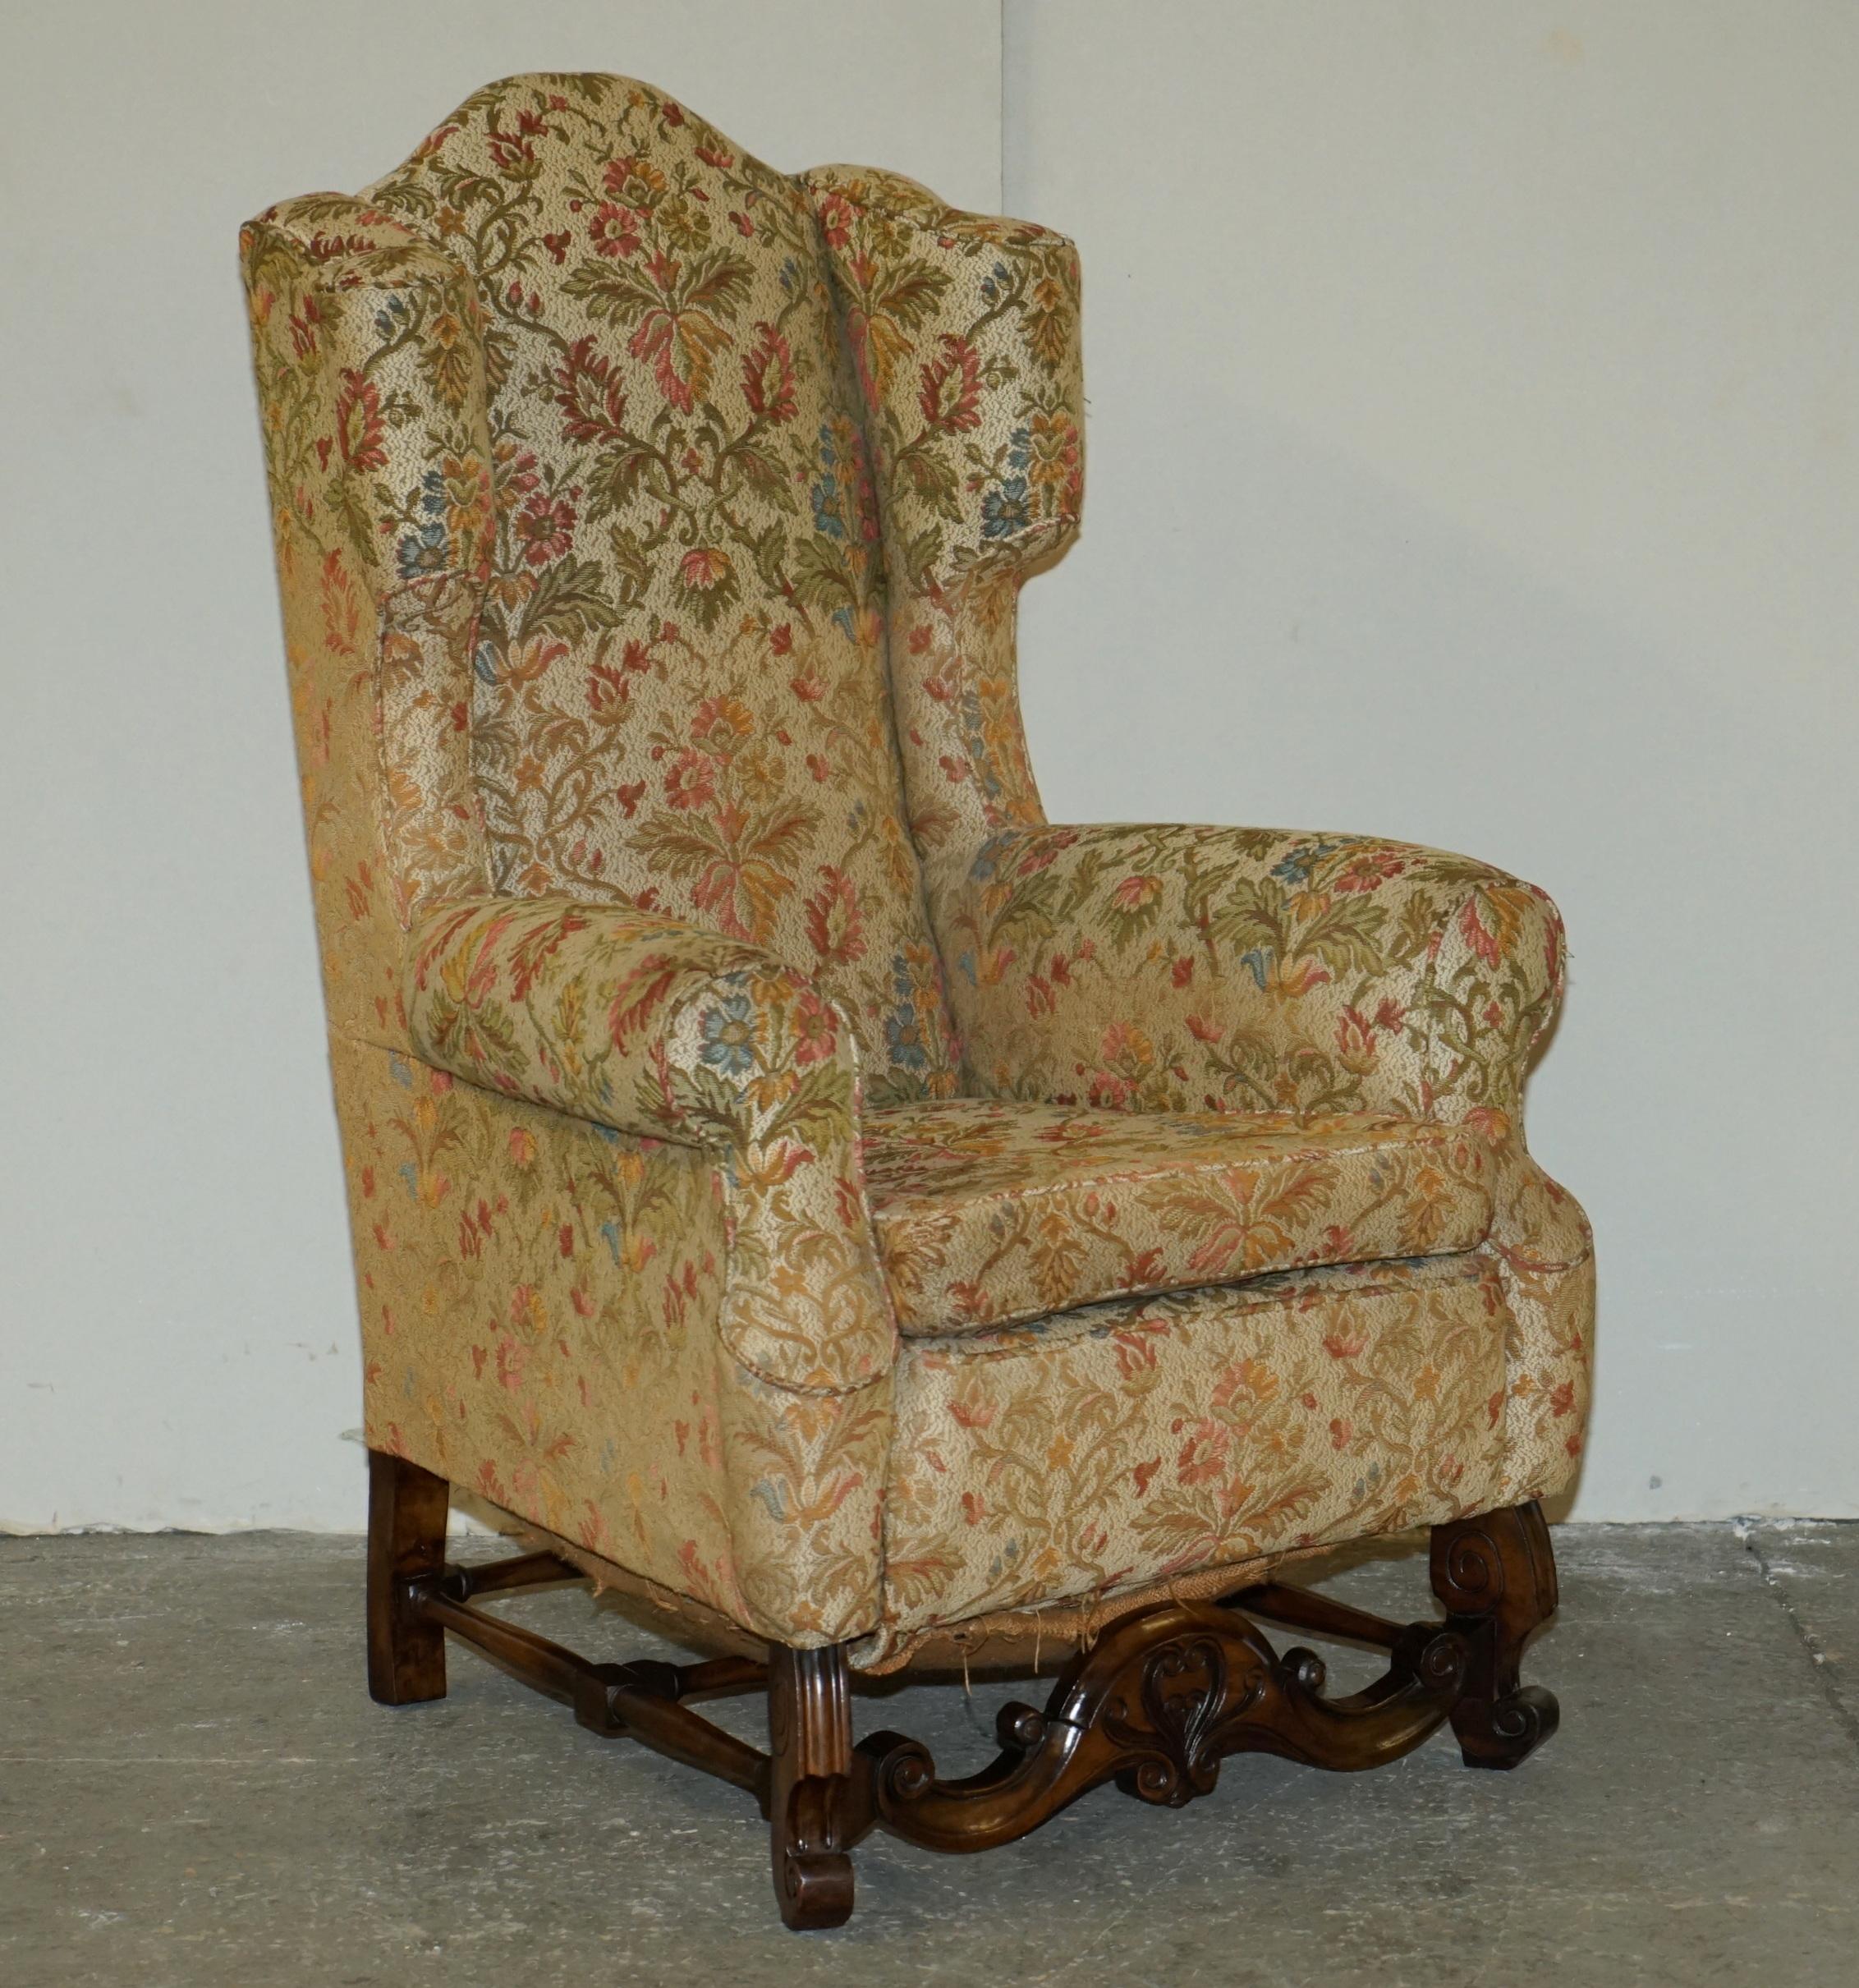 PAIR OF ANTIQUE ITALIAN CAROLEAN HIGH BACK WiNGBACK ARMCHAIRS FOR UPHOLSTERY For Sale 8